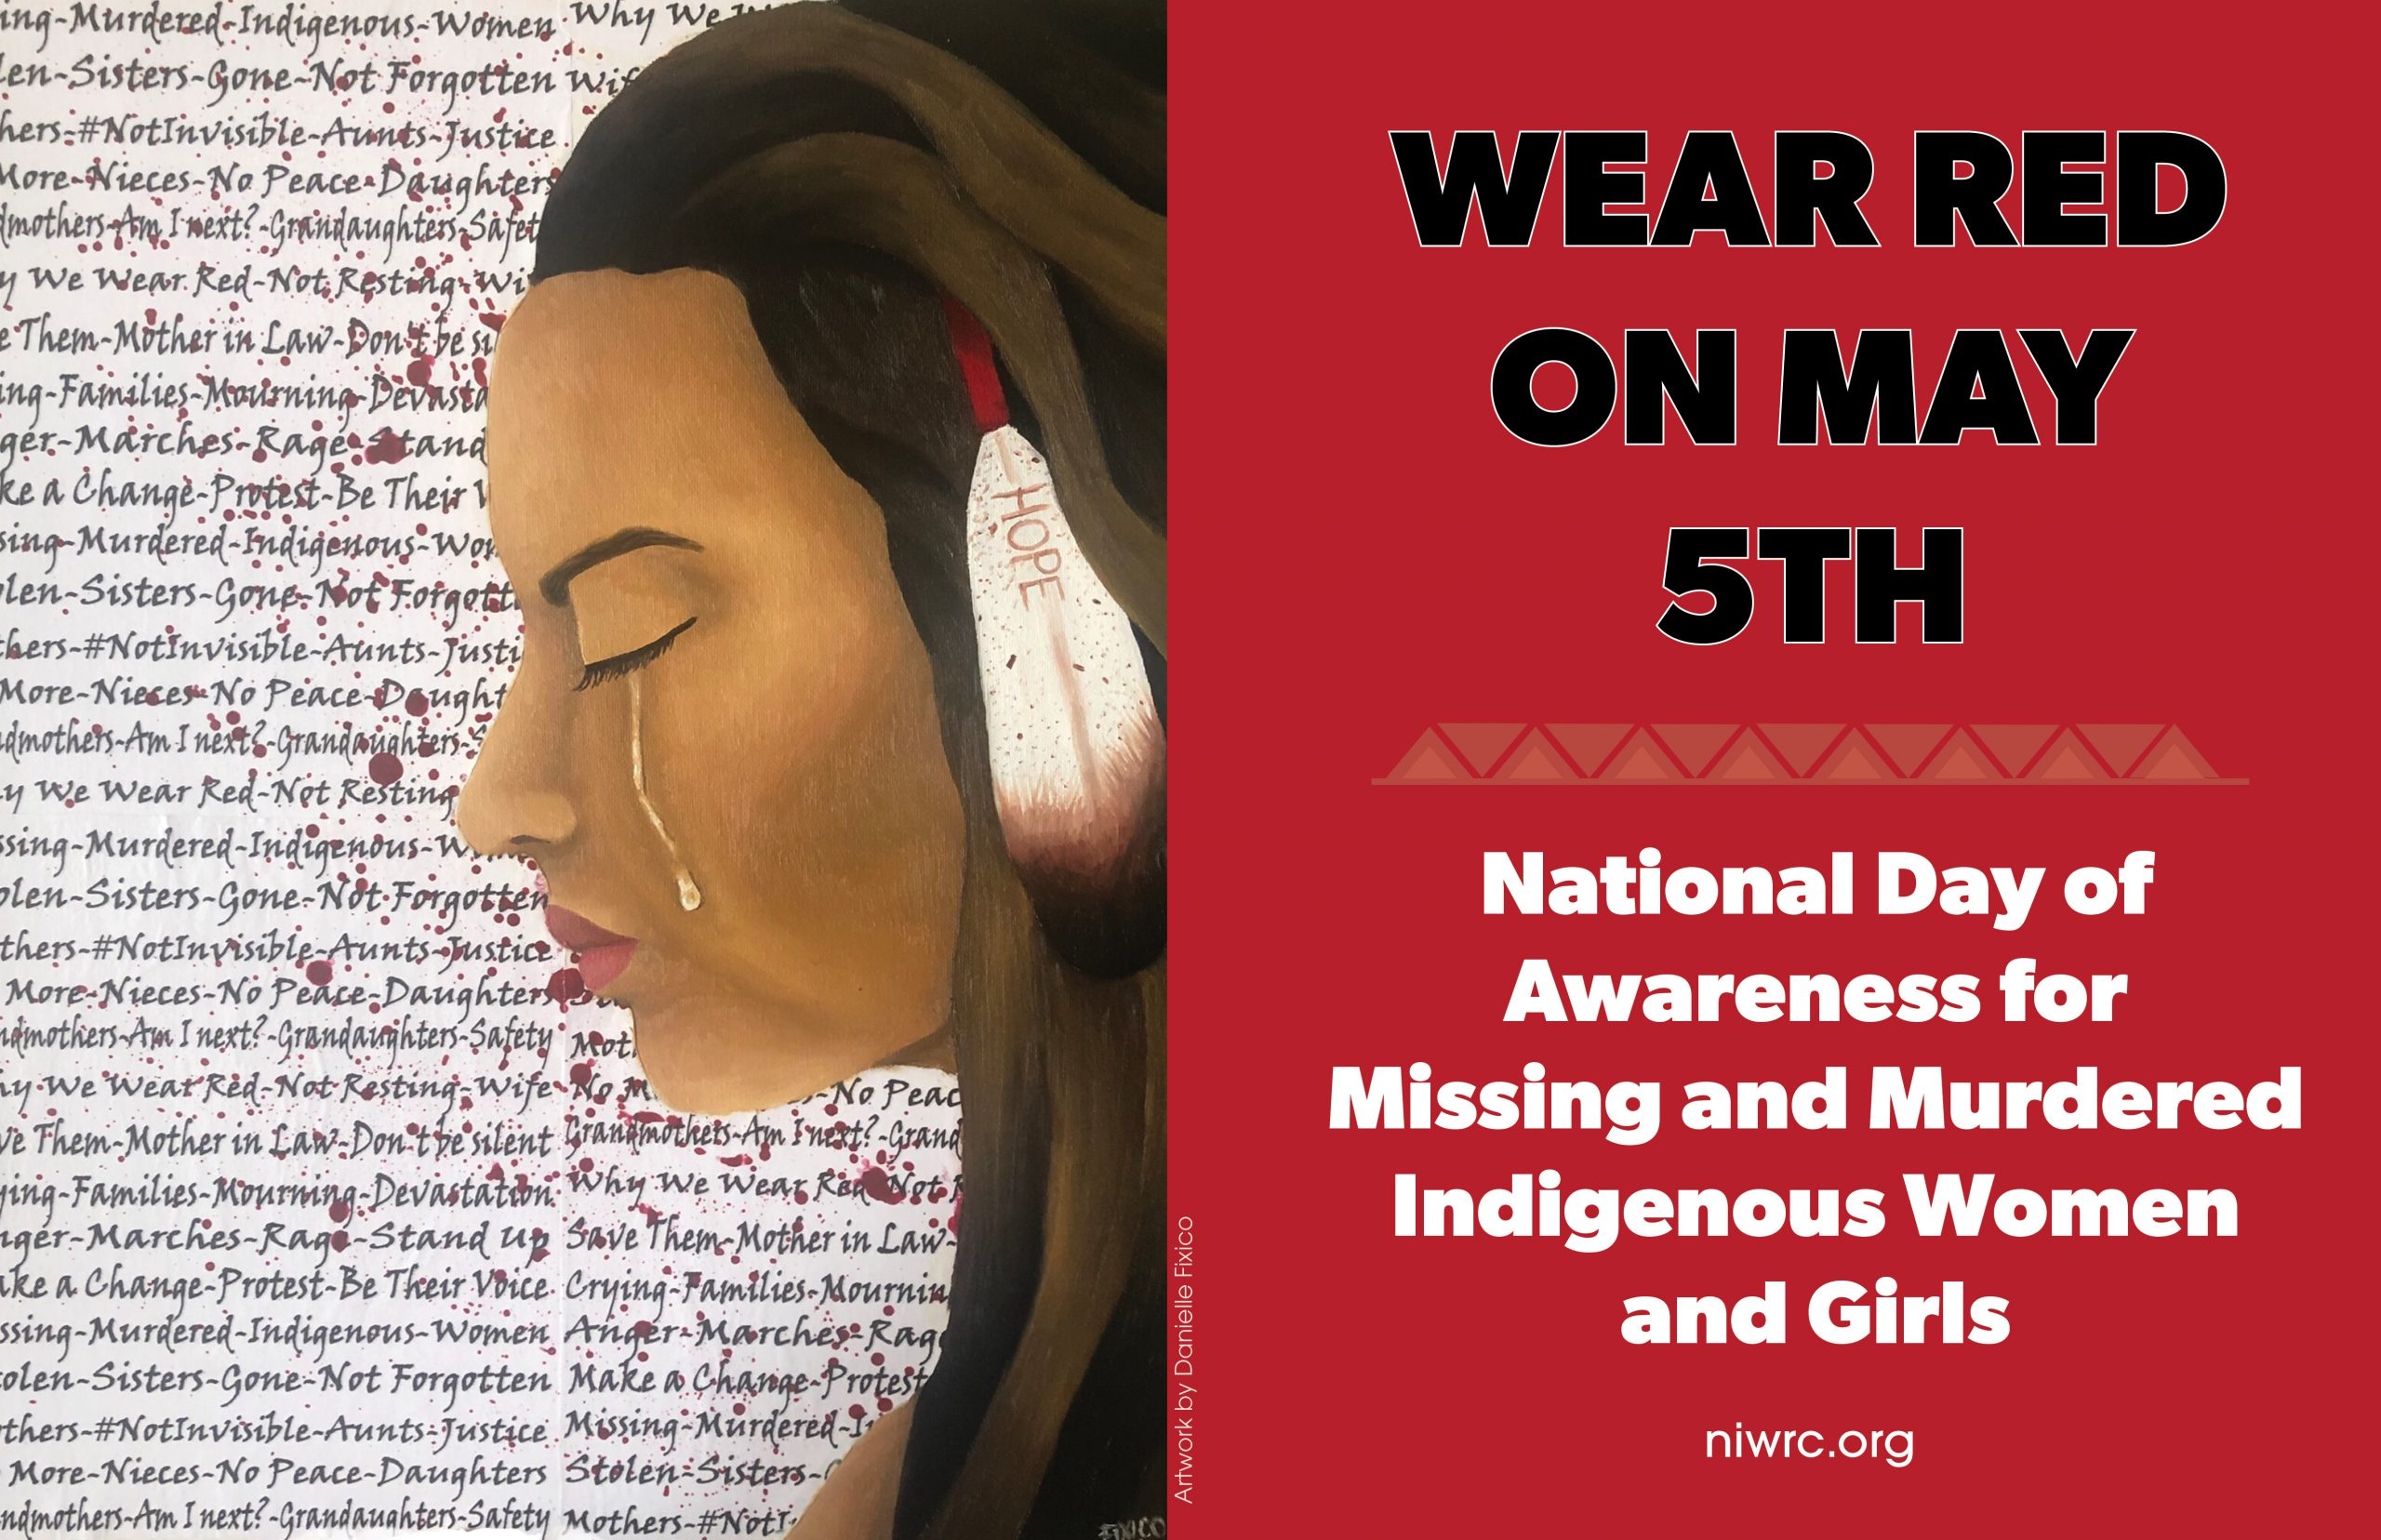 Image featuring a painting by Danielle Fixico of the side profile of an indigenous woman with a tear streaming down her face.  Text in the background of the artwork featuring various words and phrases such as: daughters, no peace, justice, #notinvisible, etc.  On the right side is a block of red with text reading "WEAR RED ON MAY 5TH / National Day of Awareness for Missing and Murdered Indigenous Women and Girls."